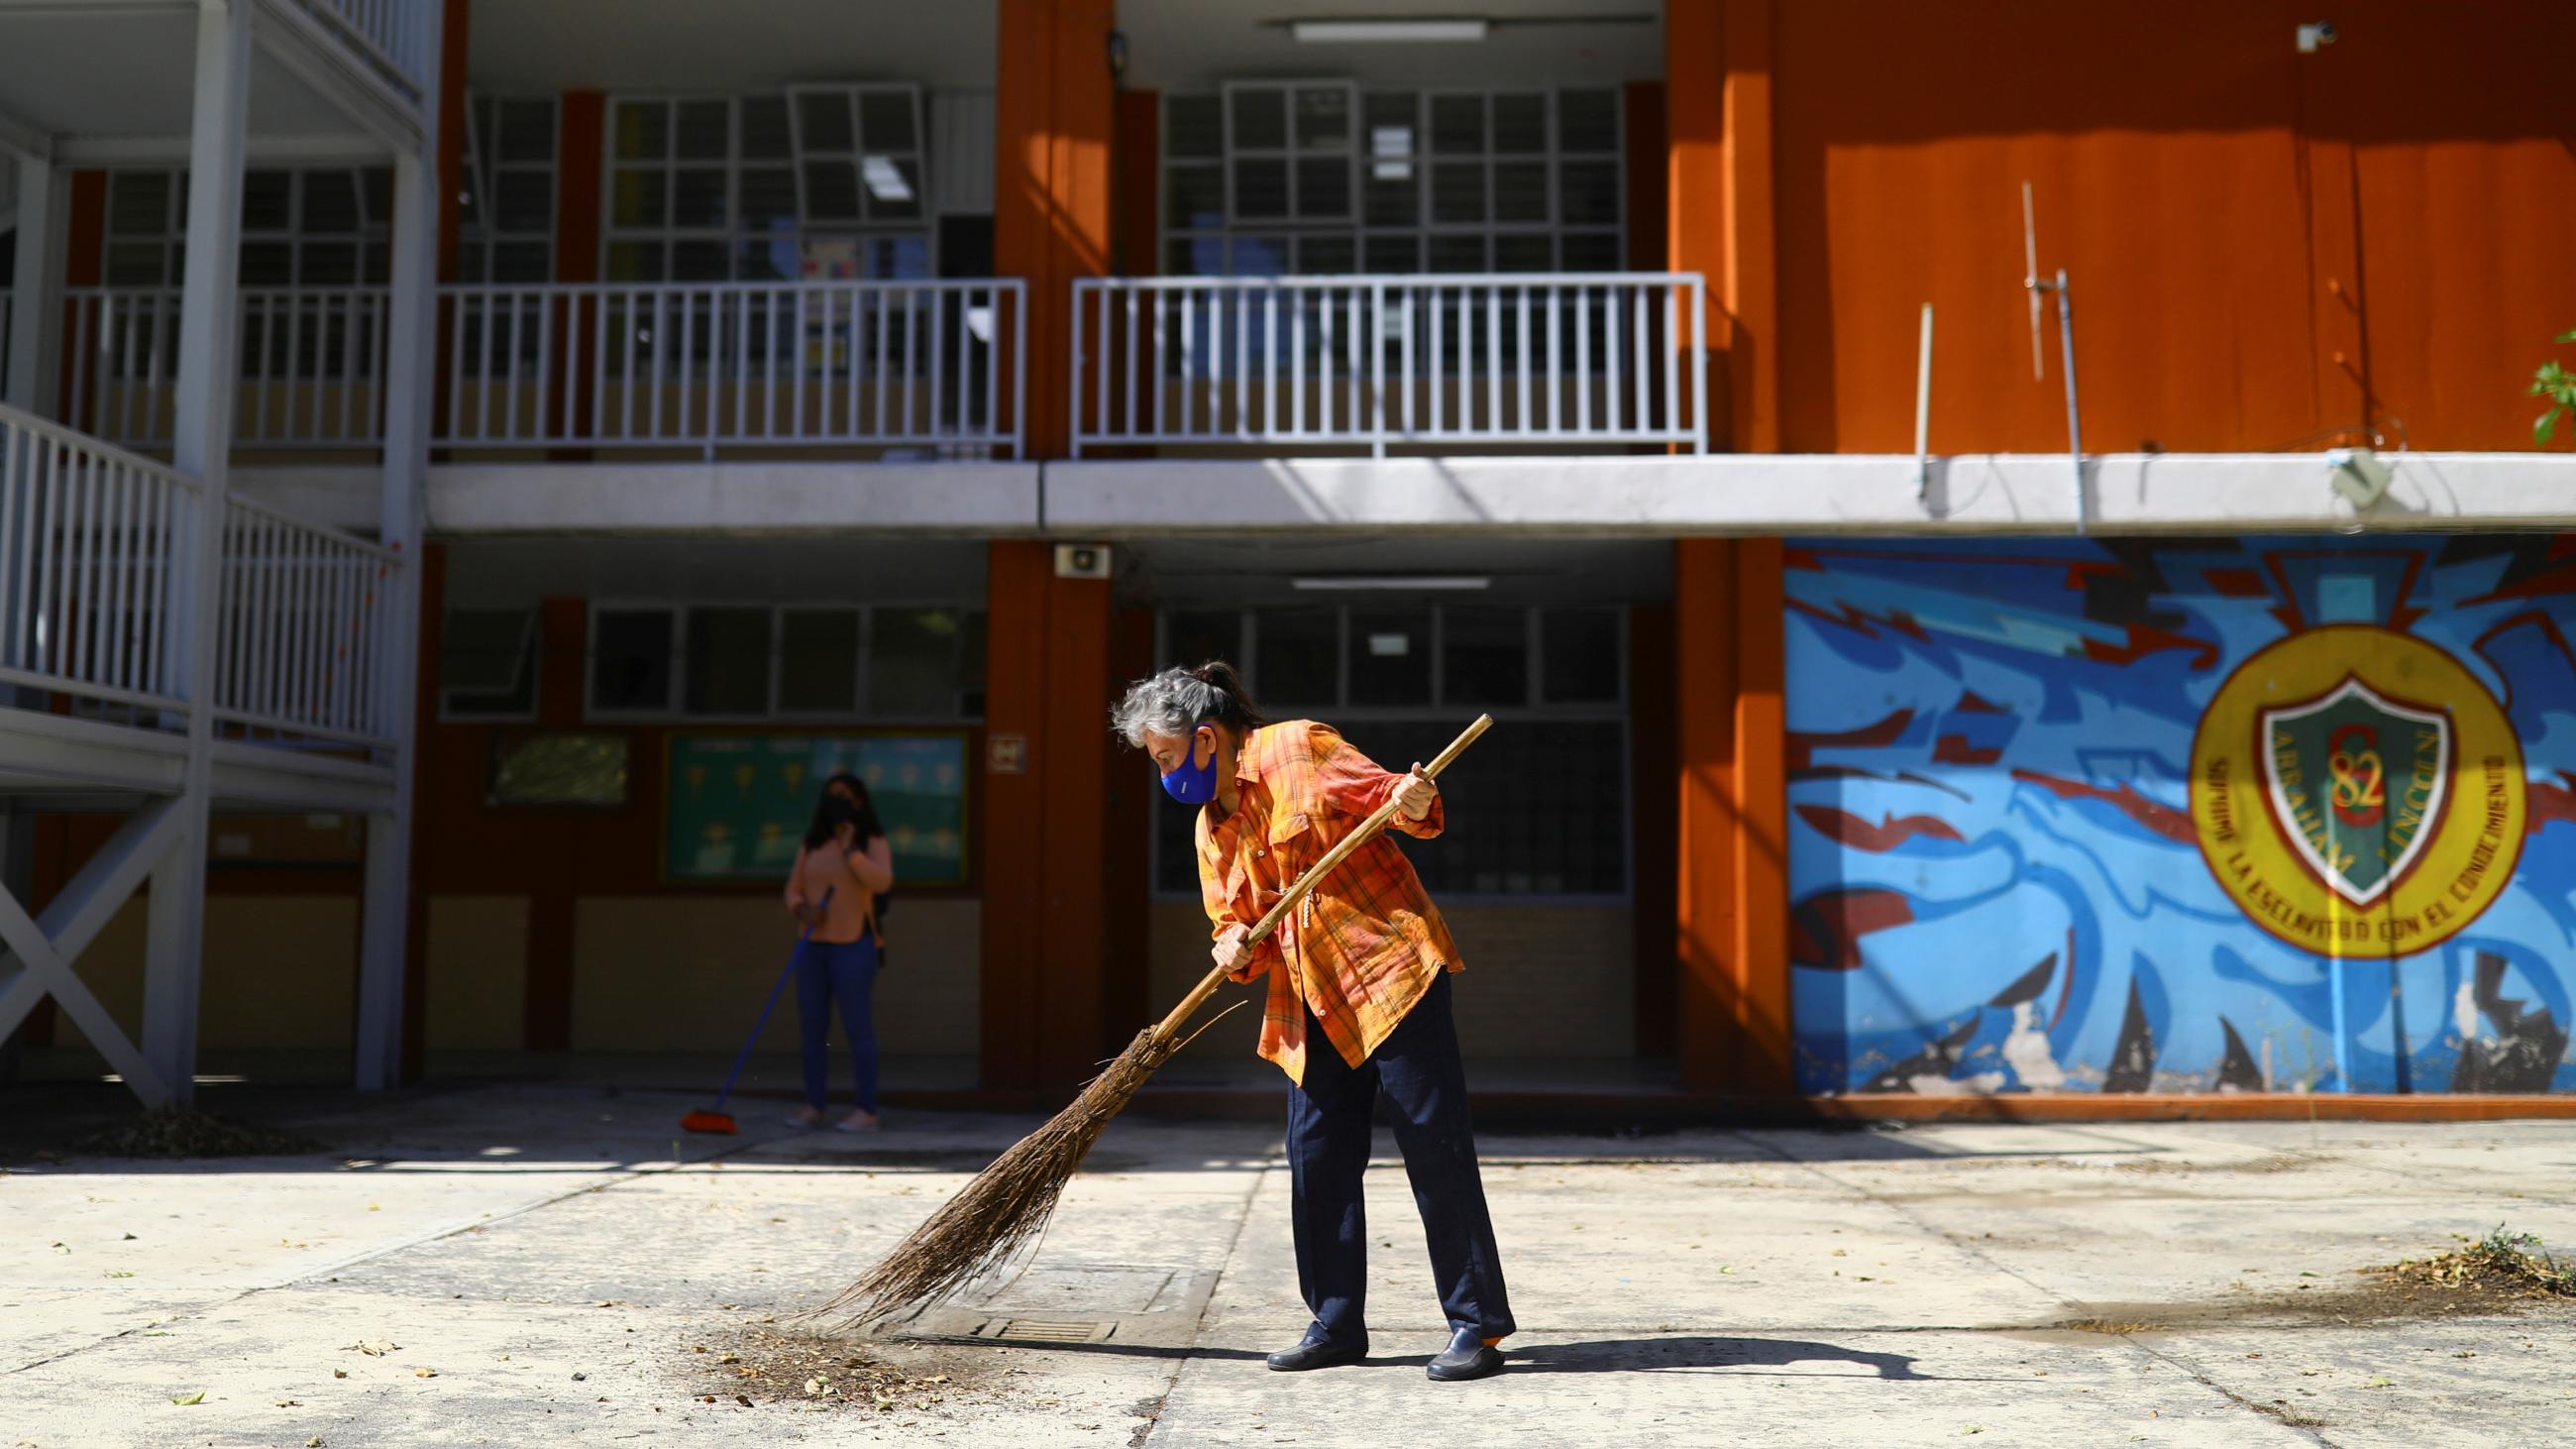 A parent sweeps a courtyard decorated in murals at Abraham Lincoln school before students return to class as part of Mexico City's reopening in May 2021.